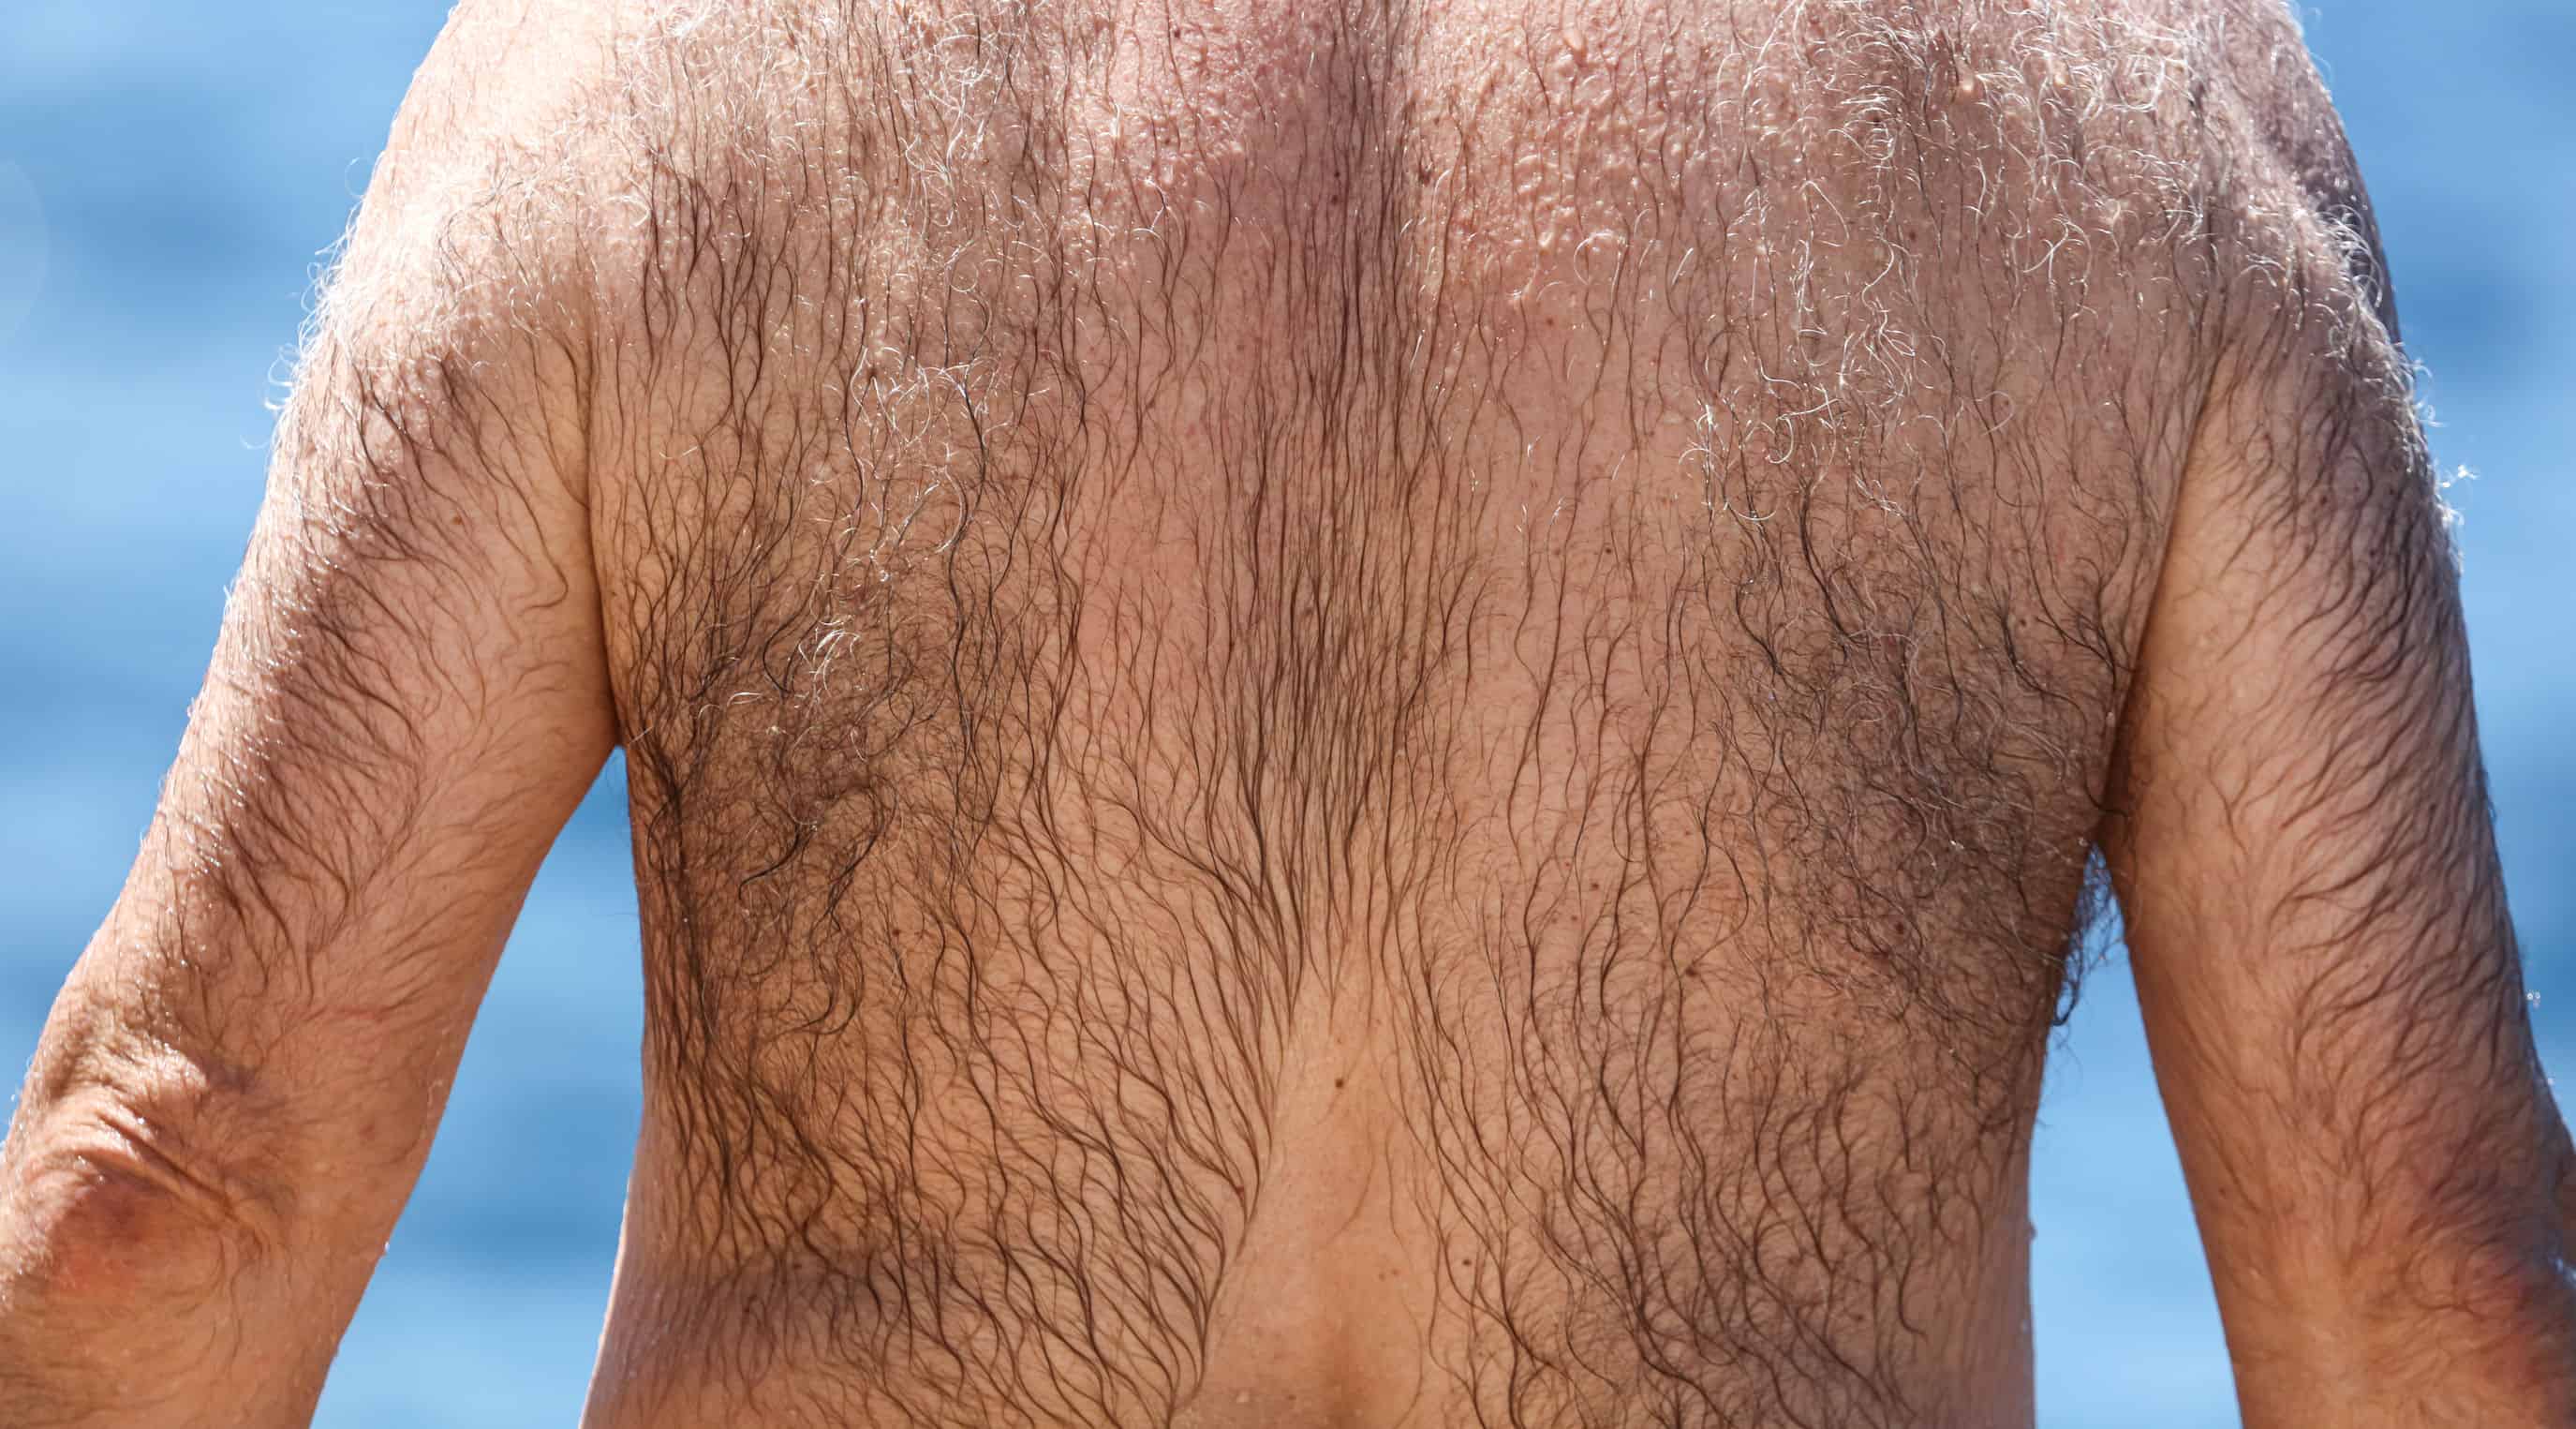 Back hair is generally body hair that causes embarrassment.